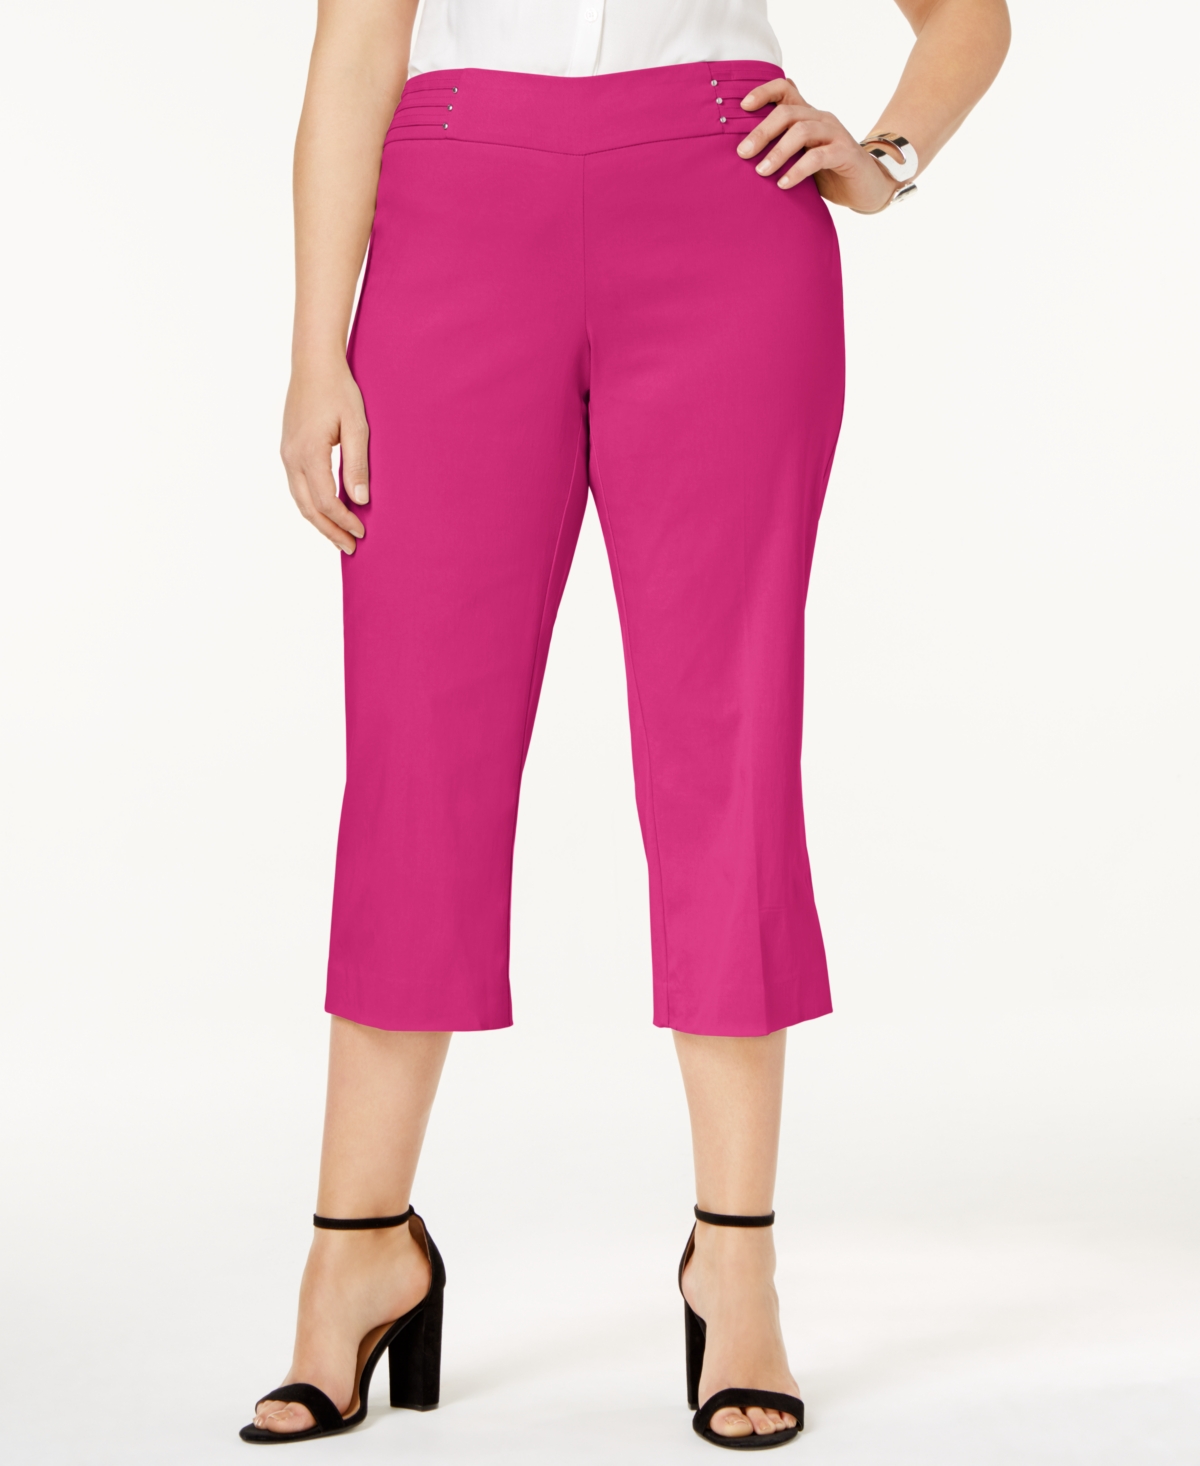 Jm Collection Plus Size Tummy Control Pull-On Capri Pants, Created